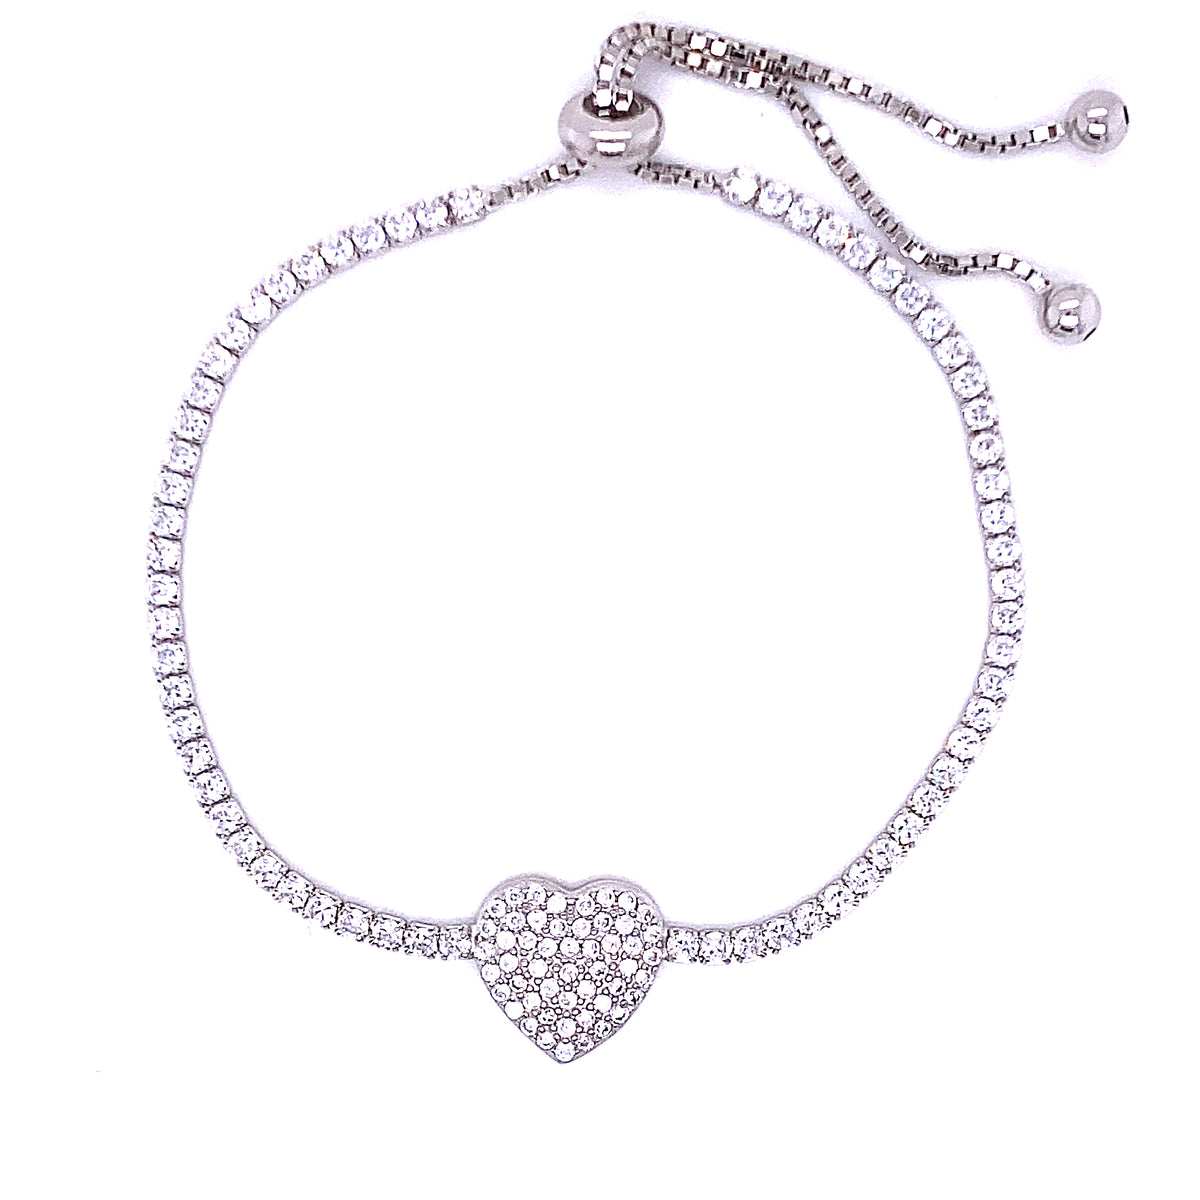 Sterling Silver and Cubic Zirconia Heart Bolo Bracelet